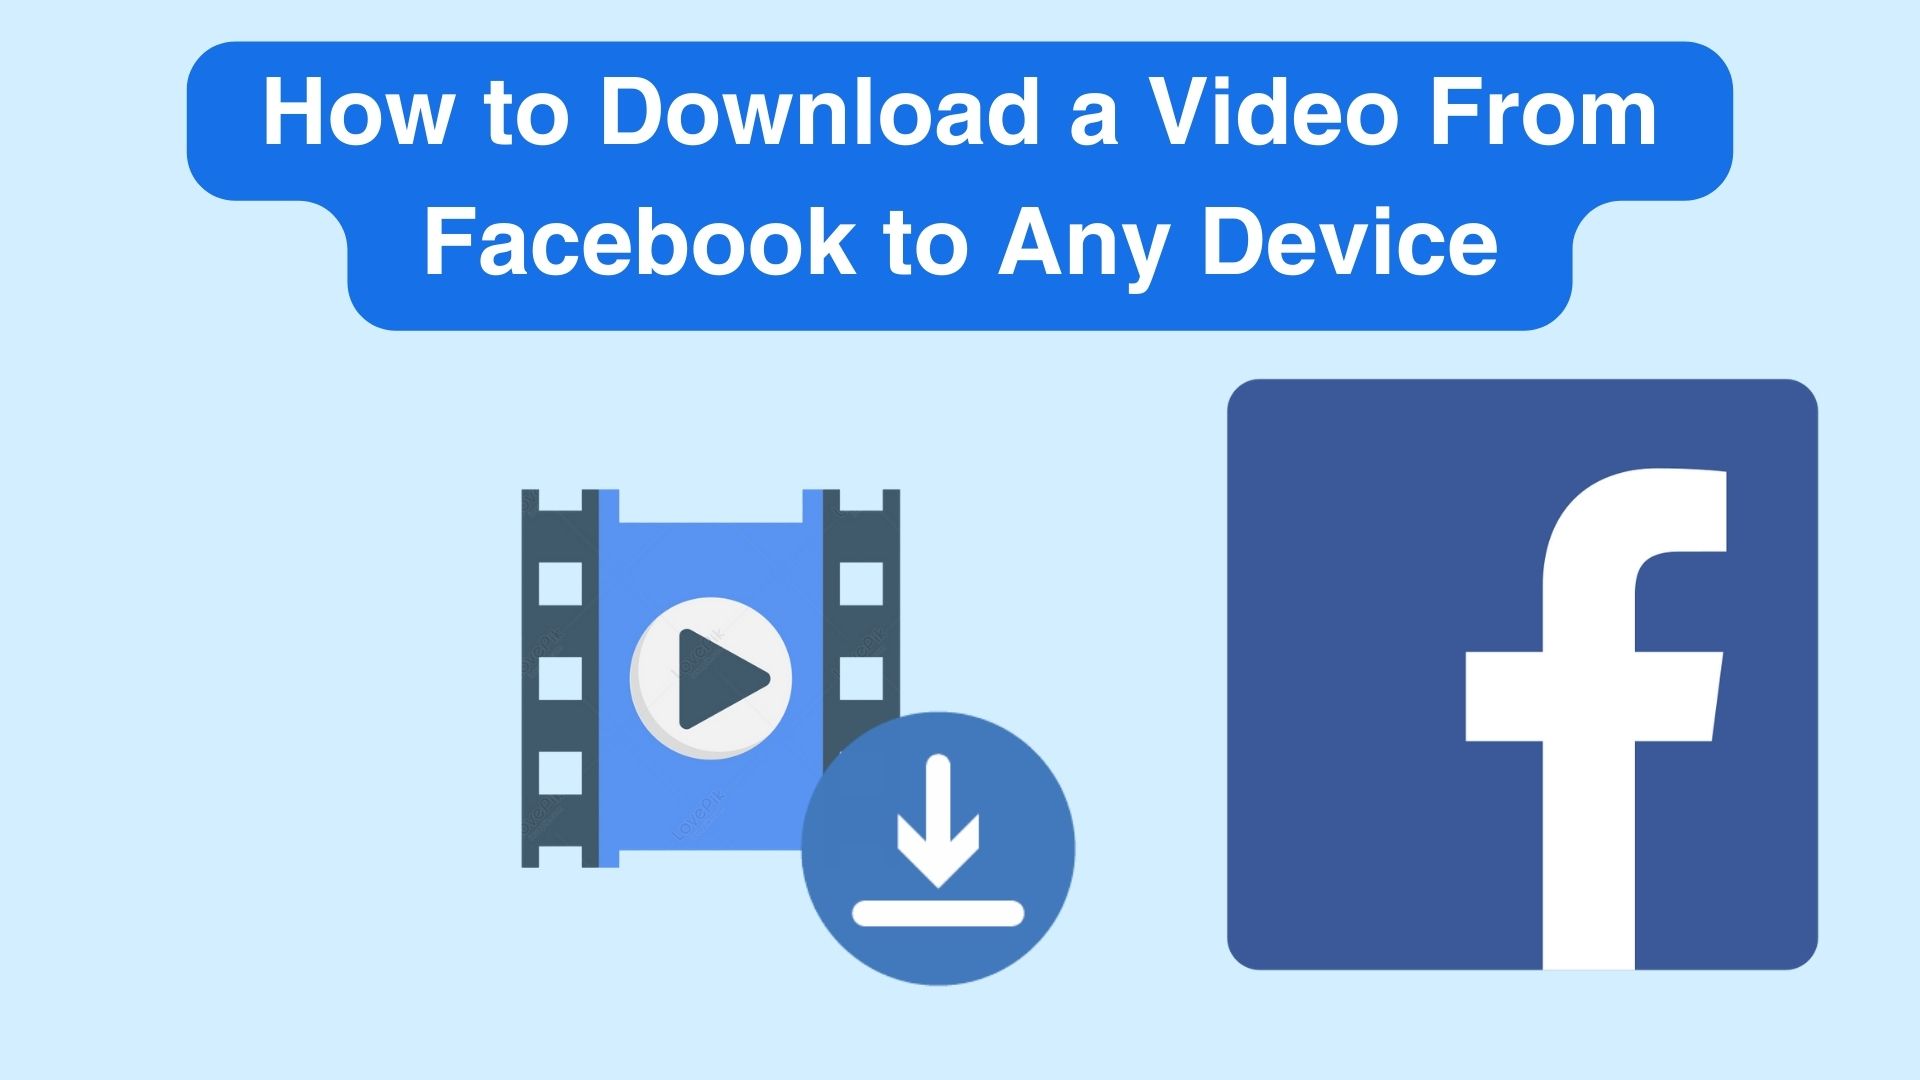 How to Download a Video From Facebook to Any Device